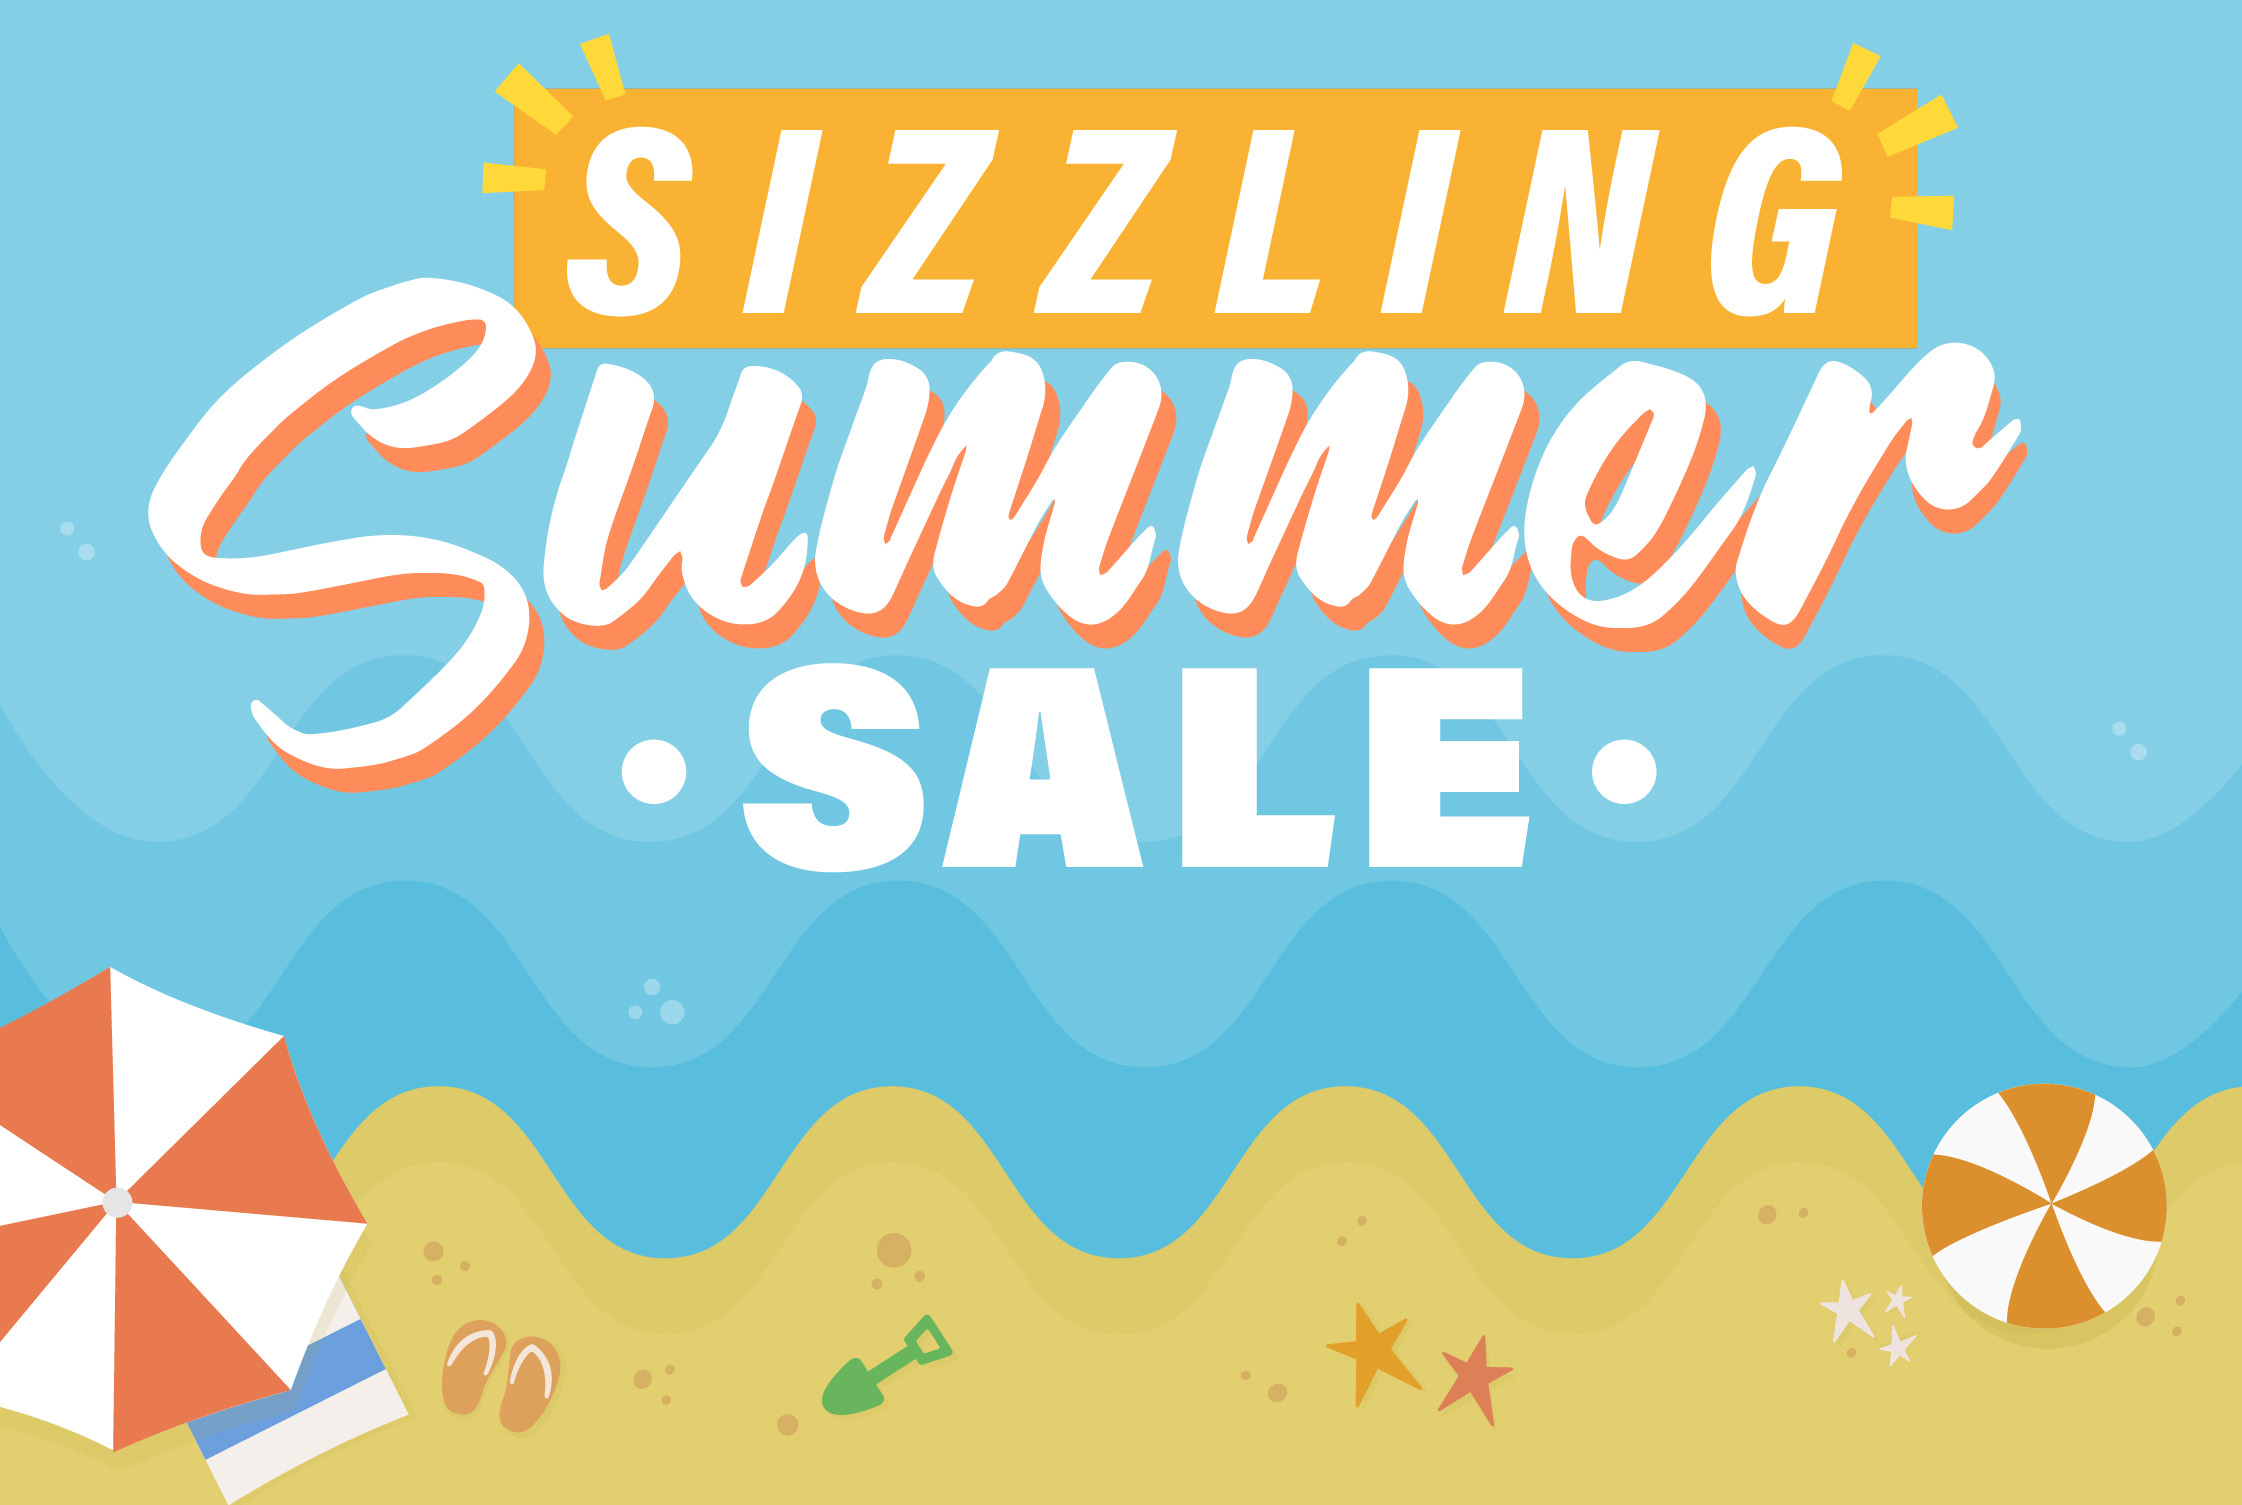 Take advantage of our sizzling summer sale! – Packer